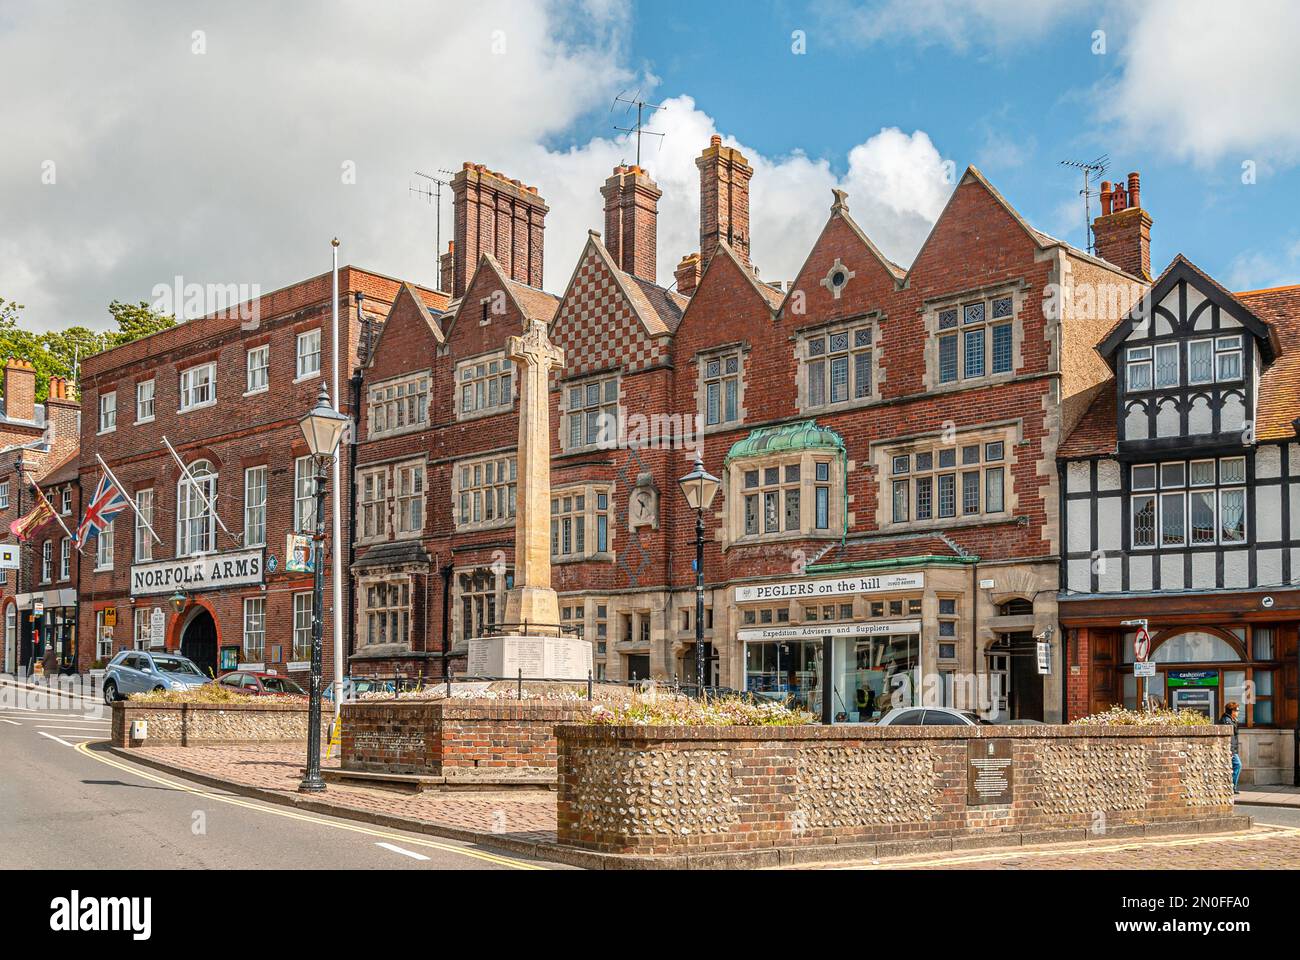 Town centre of Arundel  in West Sussex, South East England. Stock Photo